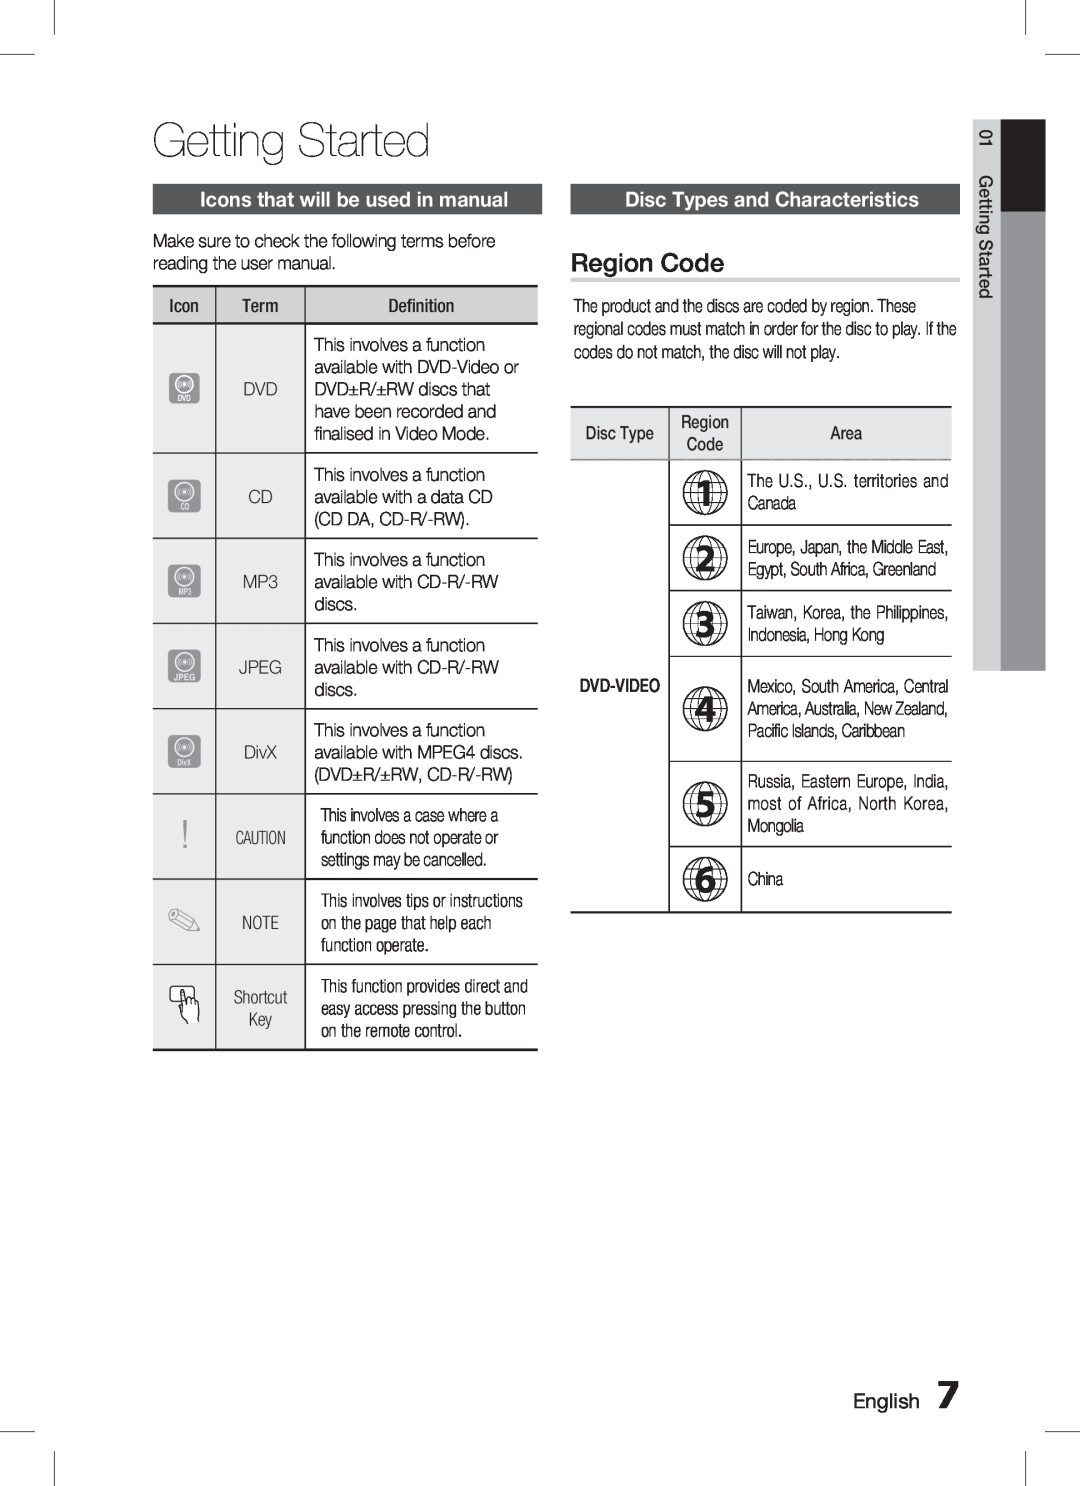 Samsung HT-C350 user manual Getting Started, Region Code, Icons that will be used in manual, Disc Types and Characteristics 